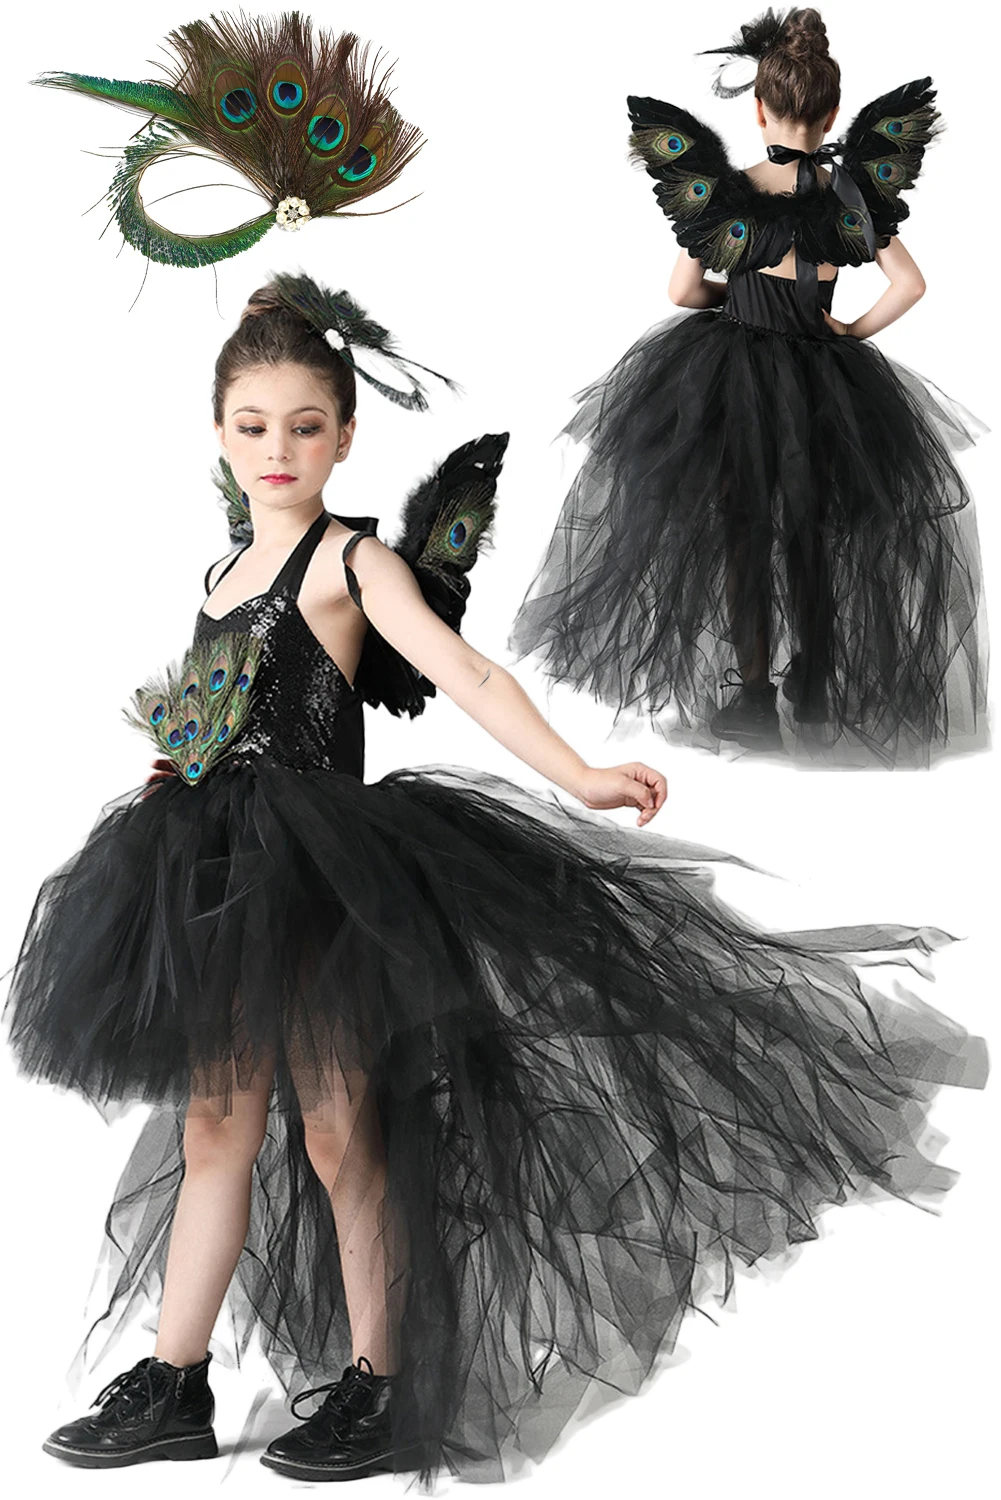 

Kids Peacock Cosplay Little Girls Black Tutu Dress Wings Dance Costume Disguise Children Roleplay Halloween Fantasia Outfits